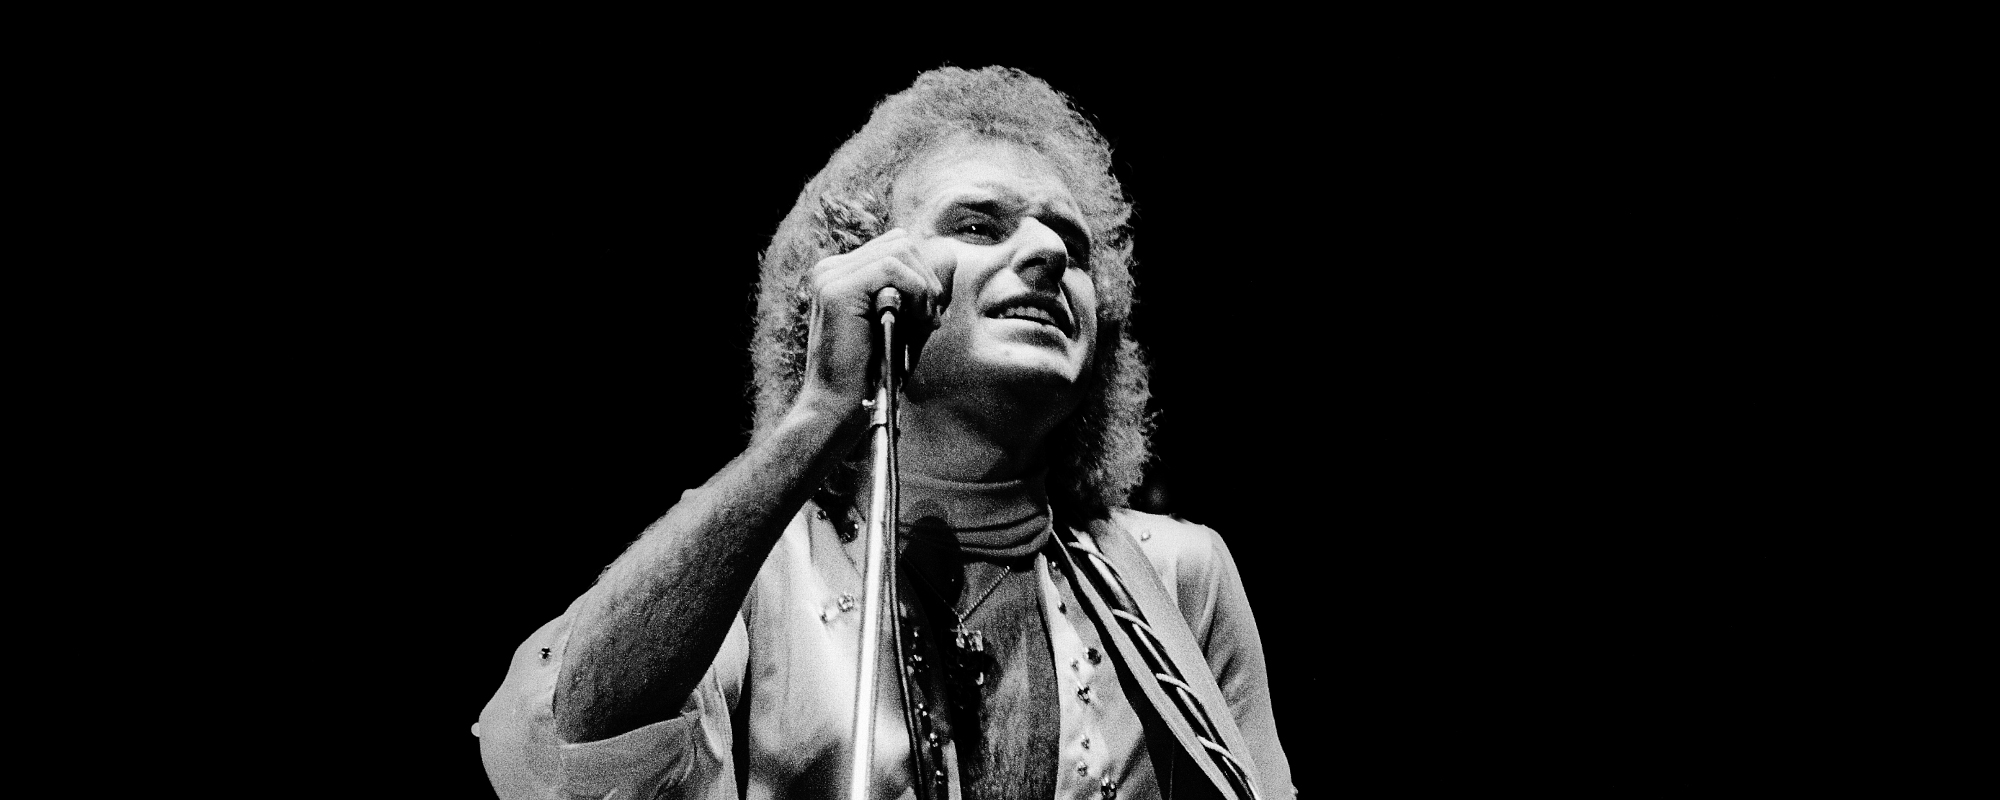 Gary Wright, Singer and Songwriter of “Dream Weaver” Dies at 80